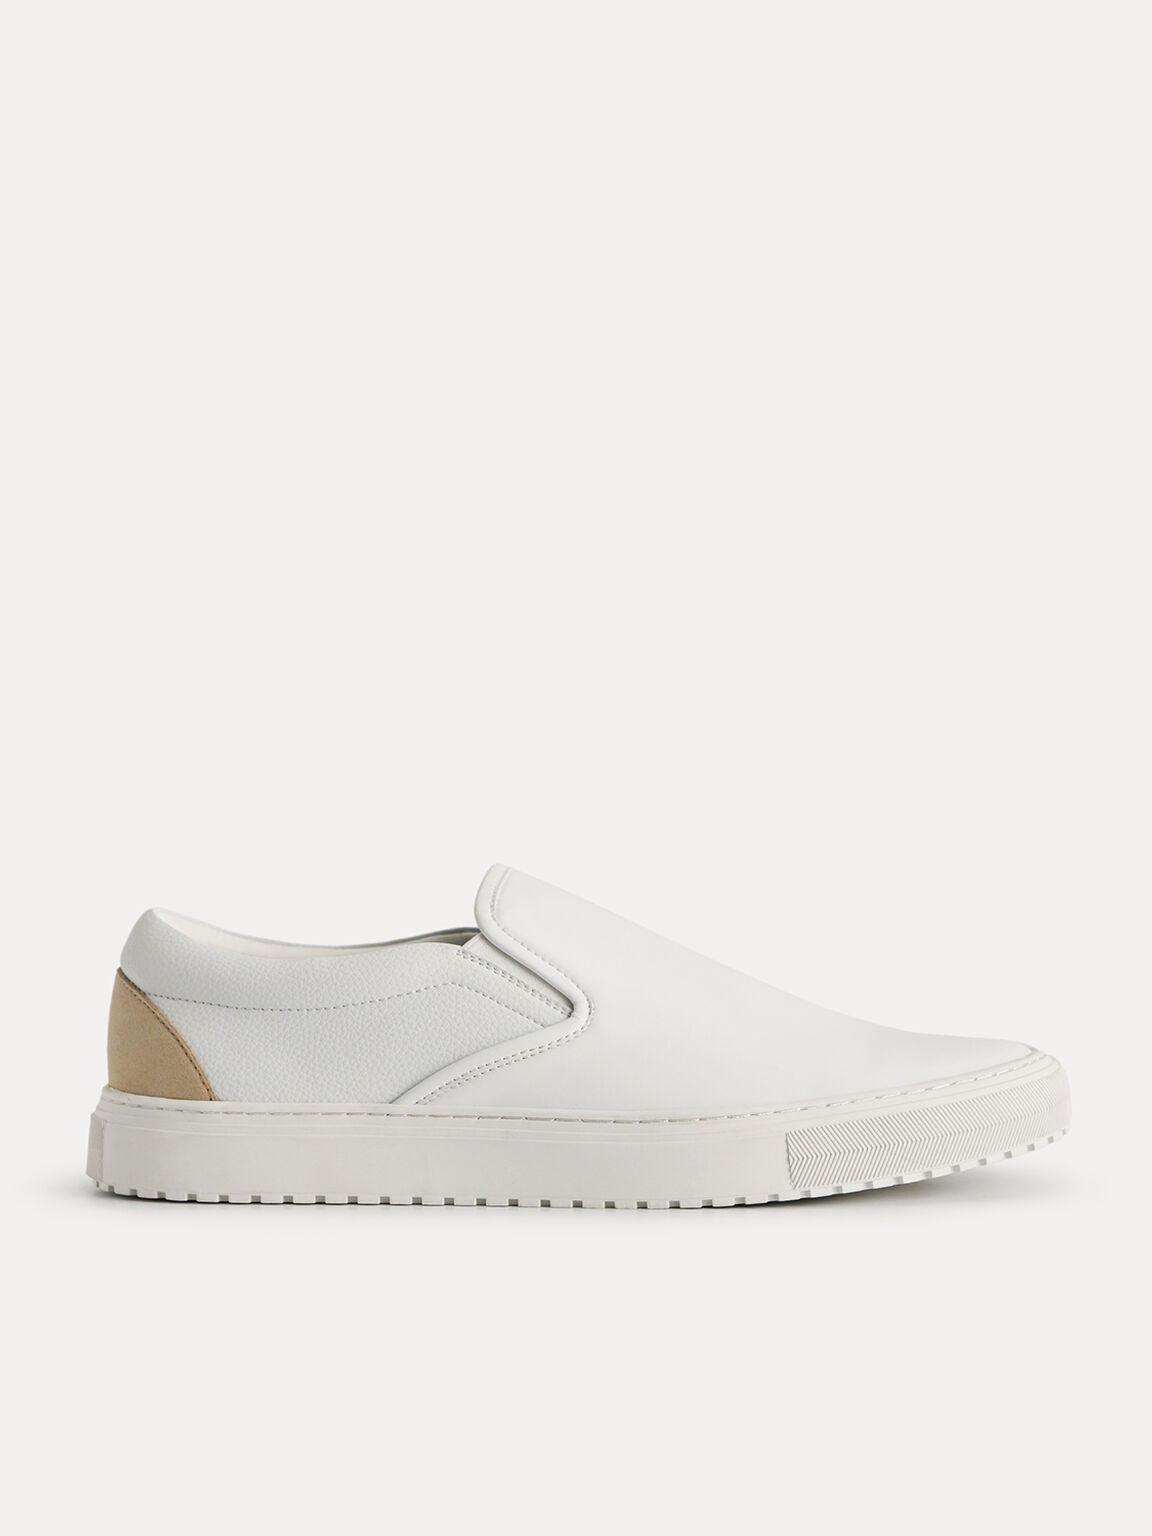 Slip-On Trainers, White